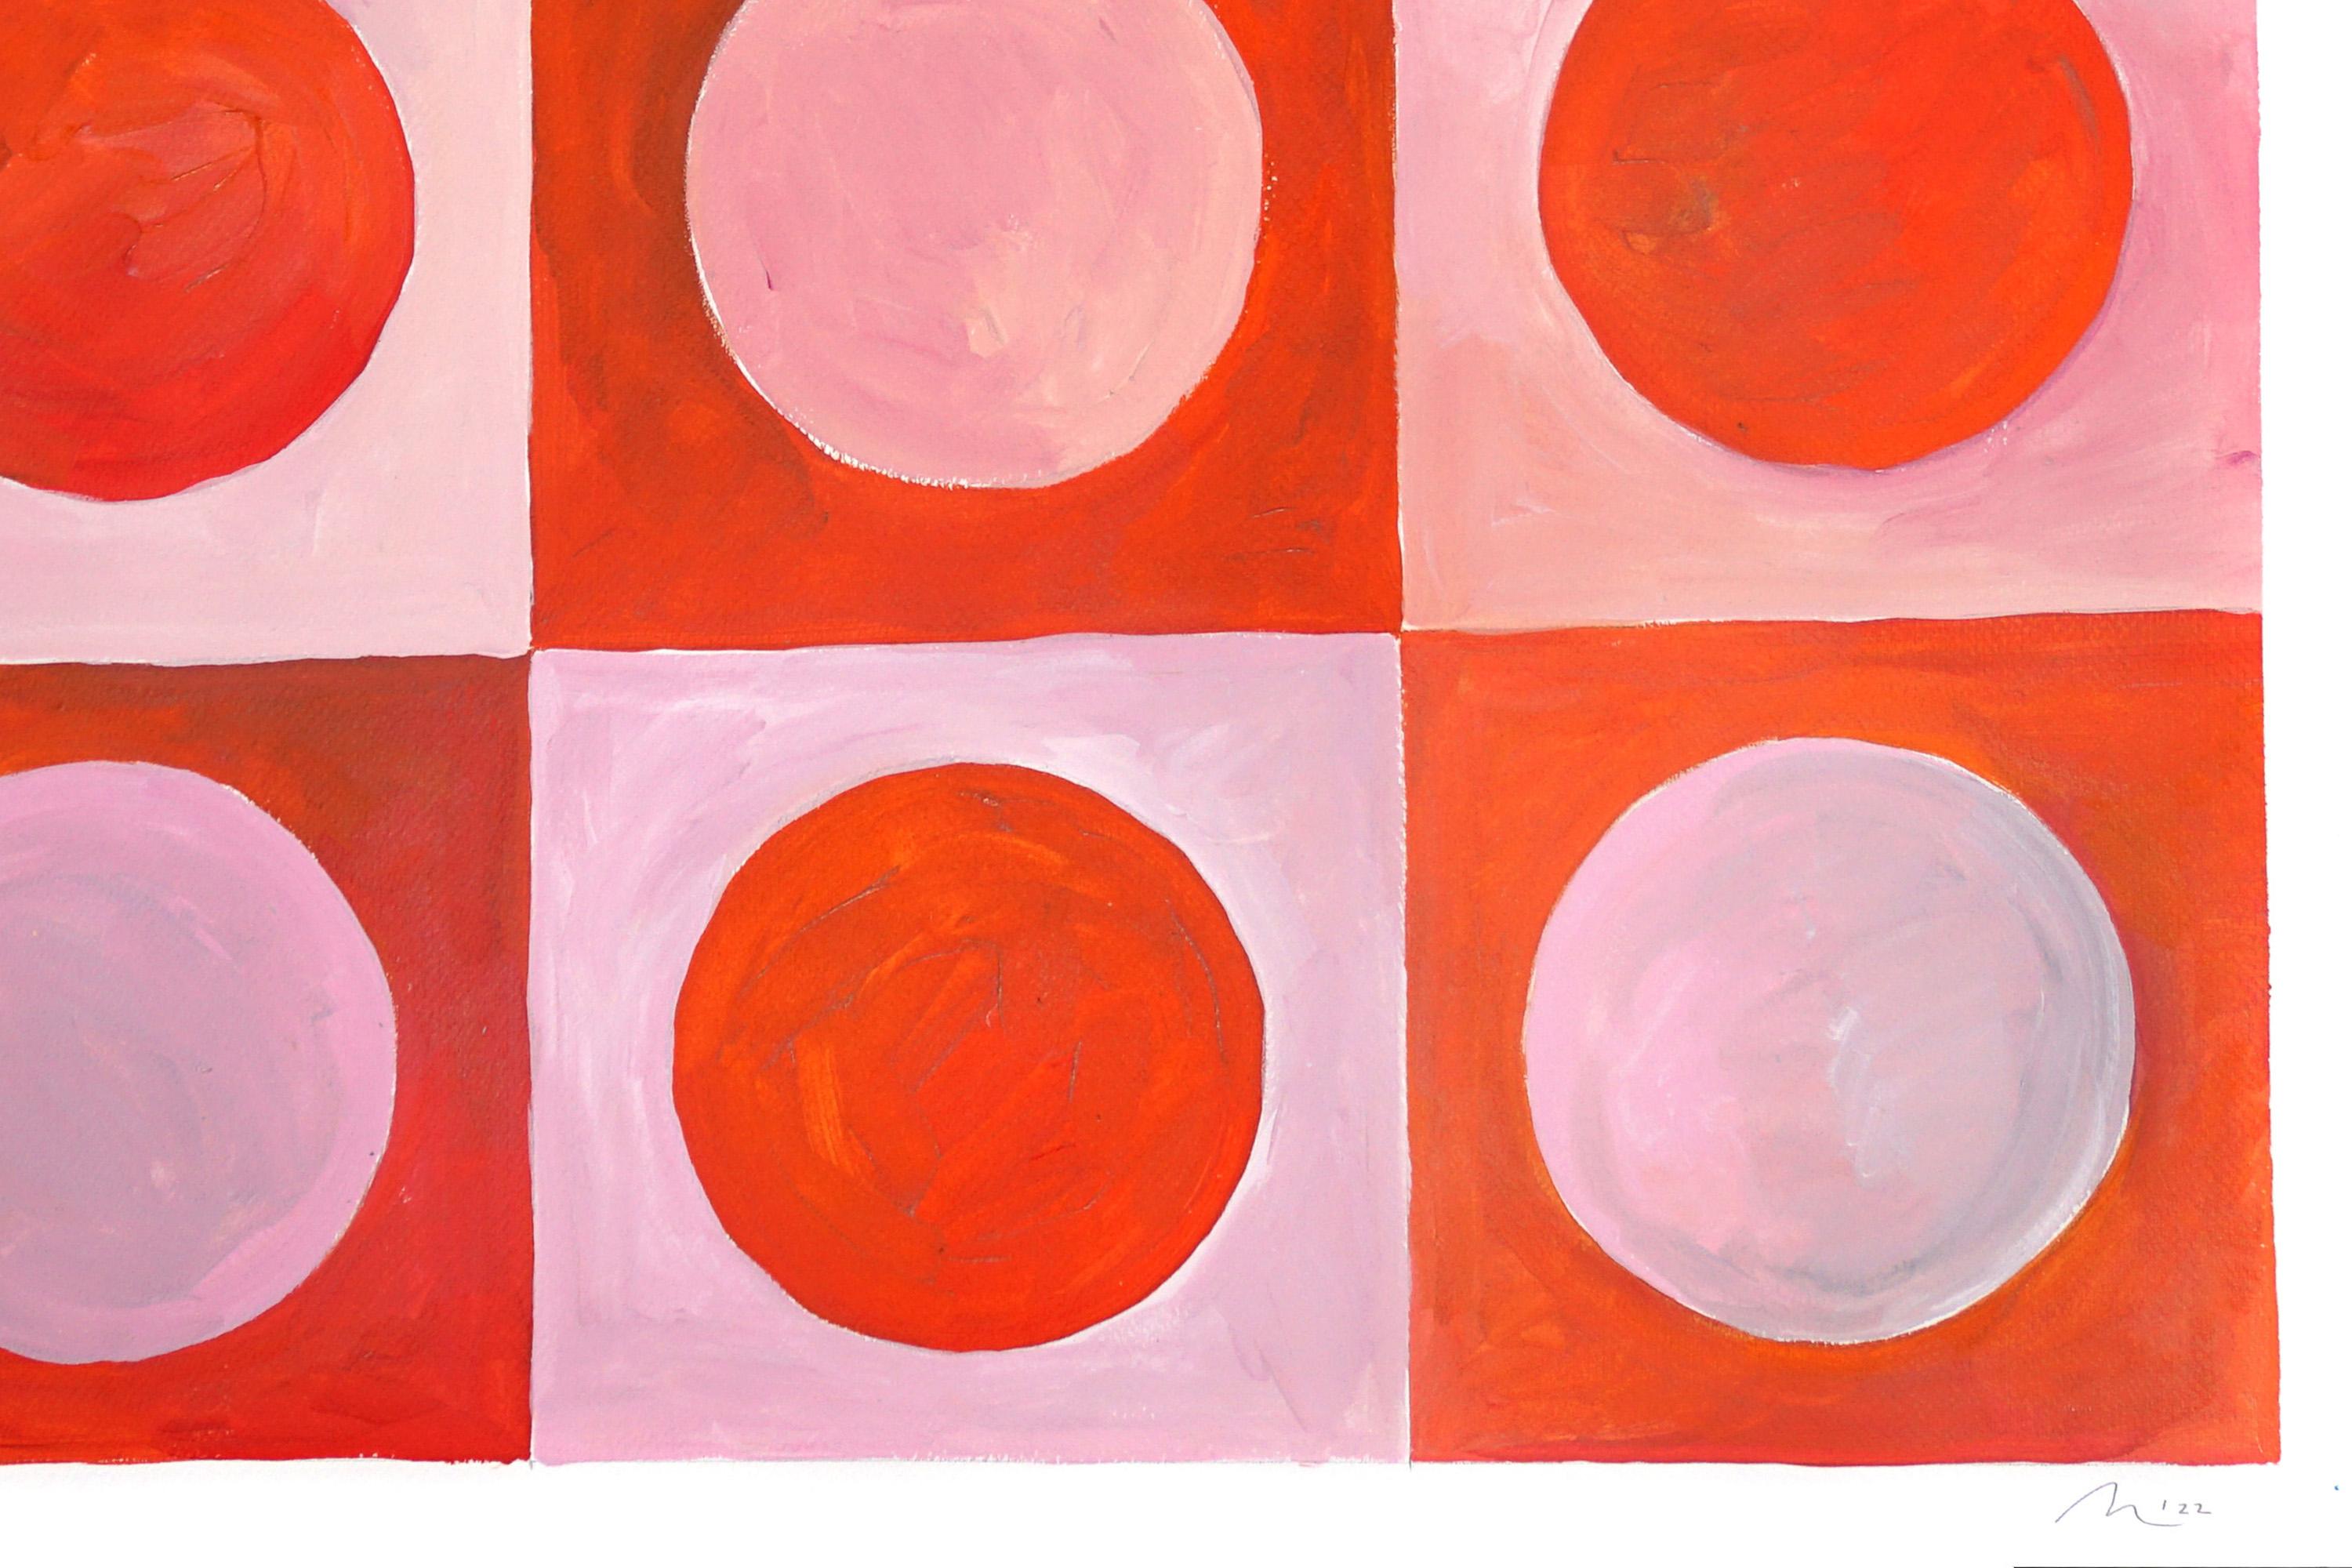 Sunset Tiles Pattern in Red and Pink, Miami Tones Checkers, Circles and Squares  - Abstract Geometric Painting by Natalia Roman